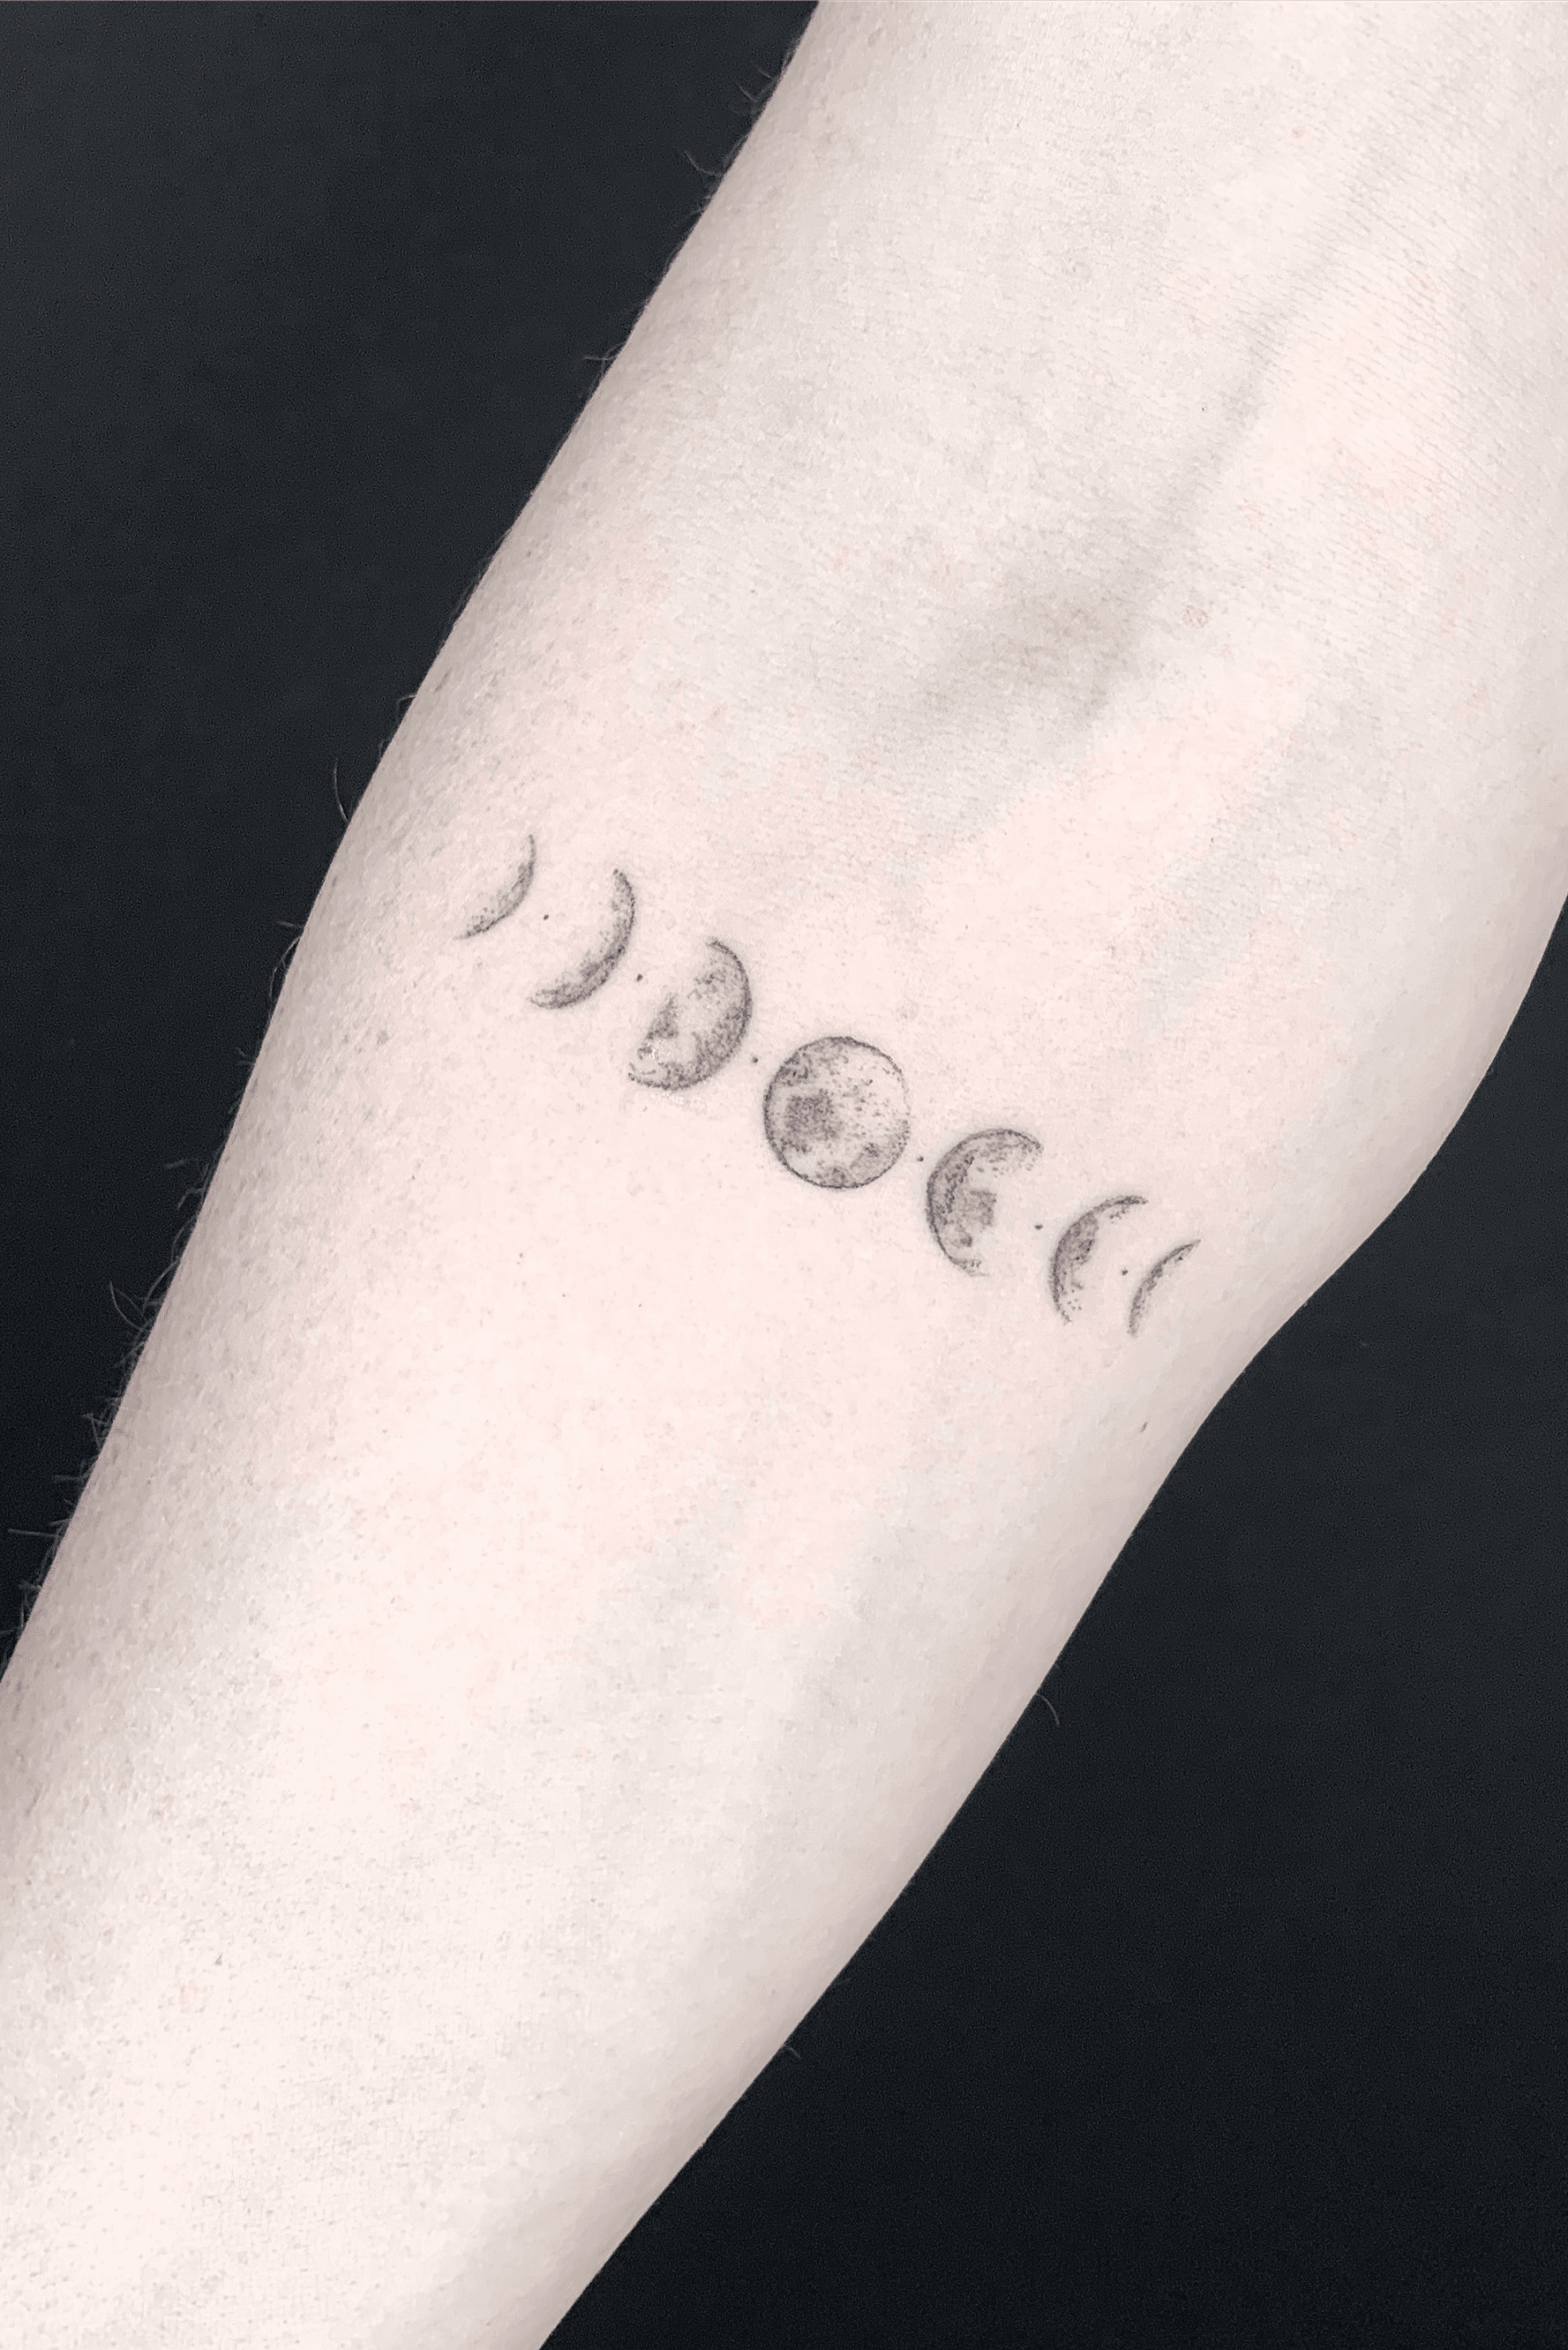 Tattoo uploaded by Yink Tattoos • Smalls phases of the moon for a moon  child ✨ • Tattoodo